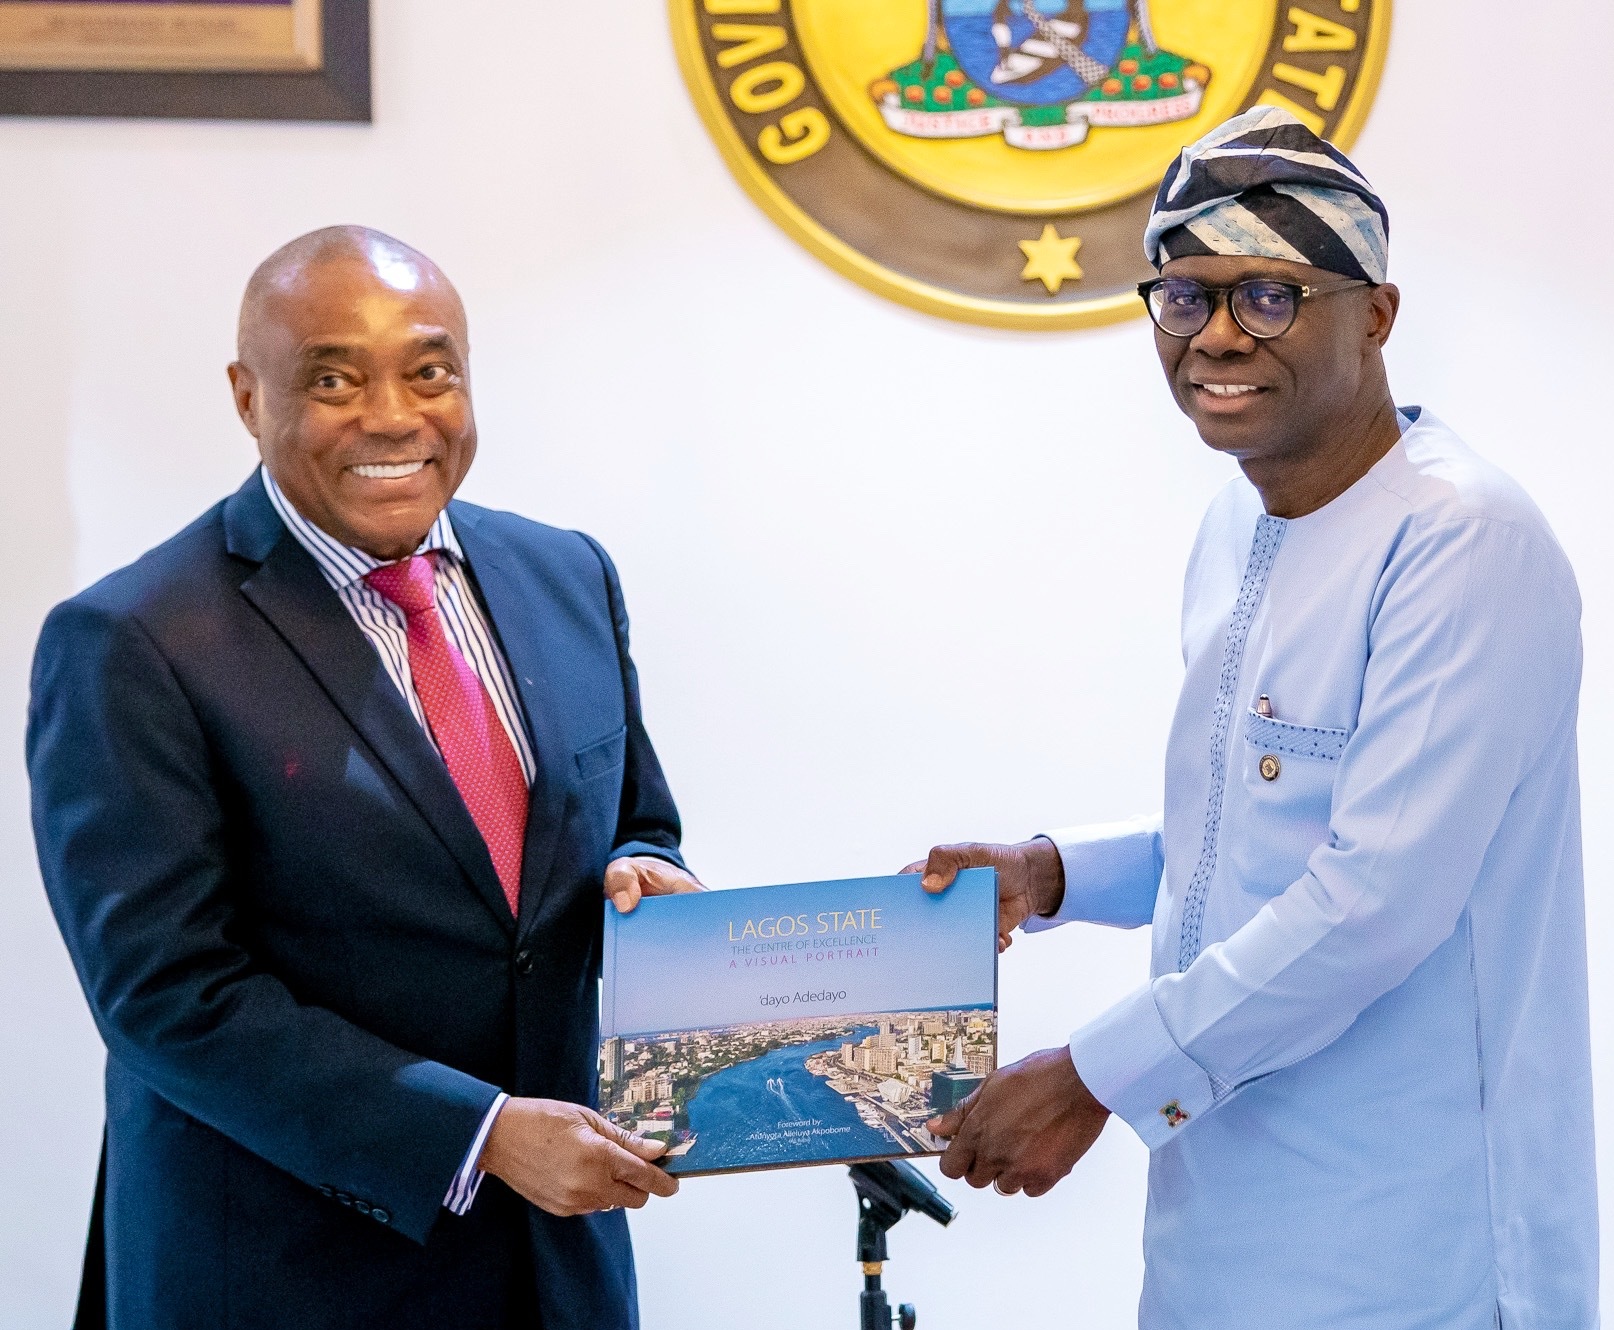 L-R: Independent Non-Executive Director of Dangote Cement Plc, Mr. Emmanuel Ikazoboh, receiving a compendium from Lagos State Governor, Mr. Babajide Sanwo-Olu, during a courtesy visit to the Governor by the executive management of Dangote Cement Plc at Lagos House, Marina, on Wednesday, March 18, 2020.